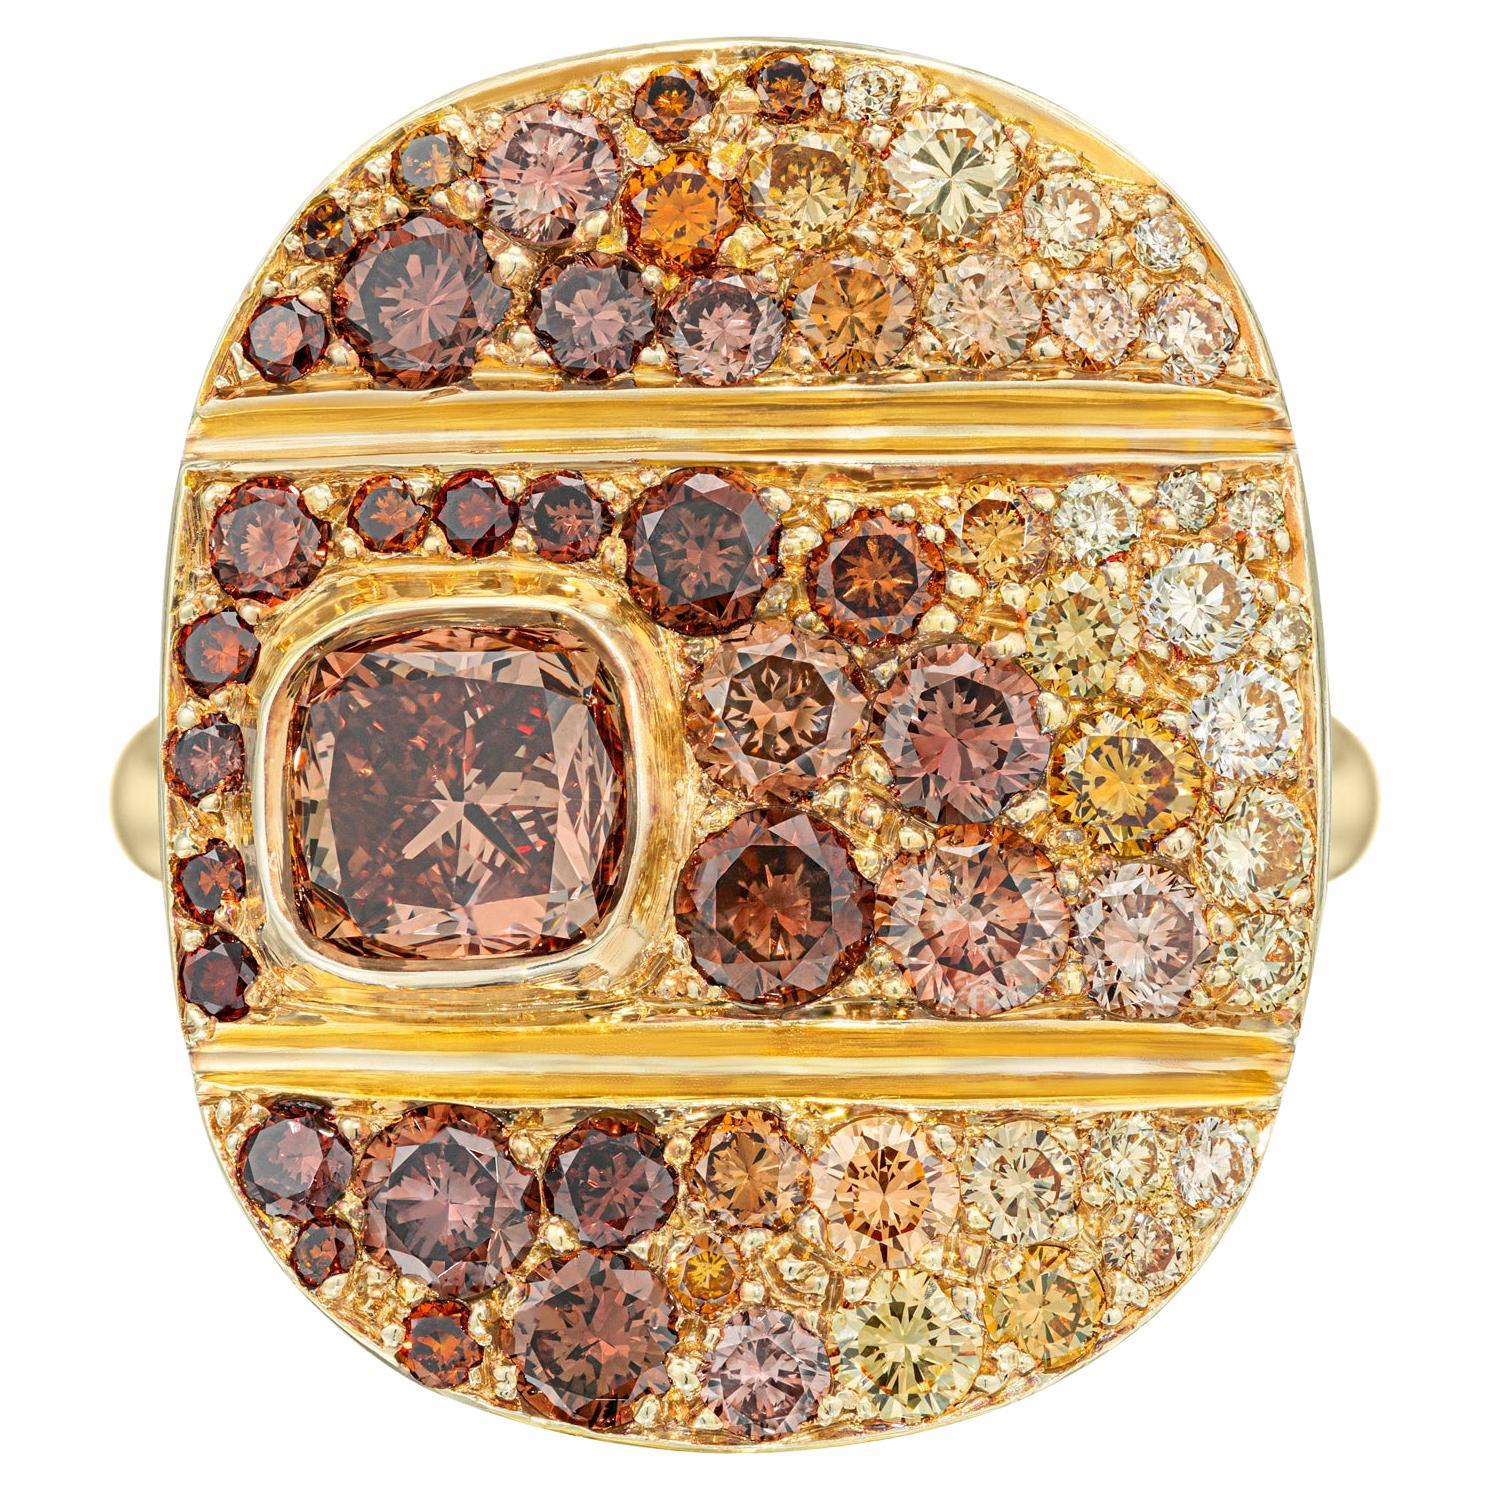 "Cop Cot" Fancy Colored Diamond Simon Ardem New York Fall Collection For Sale